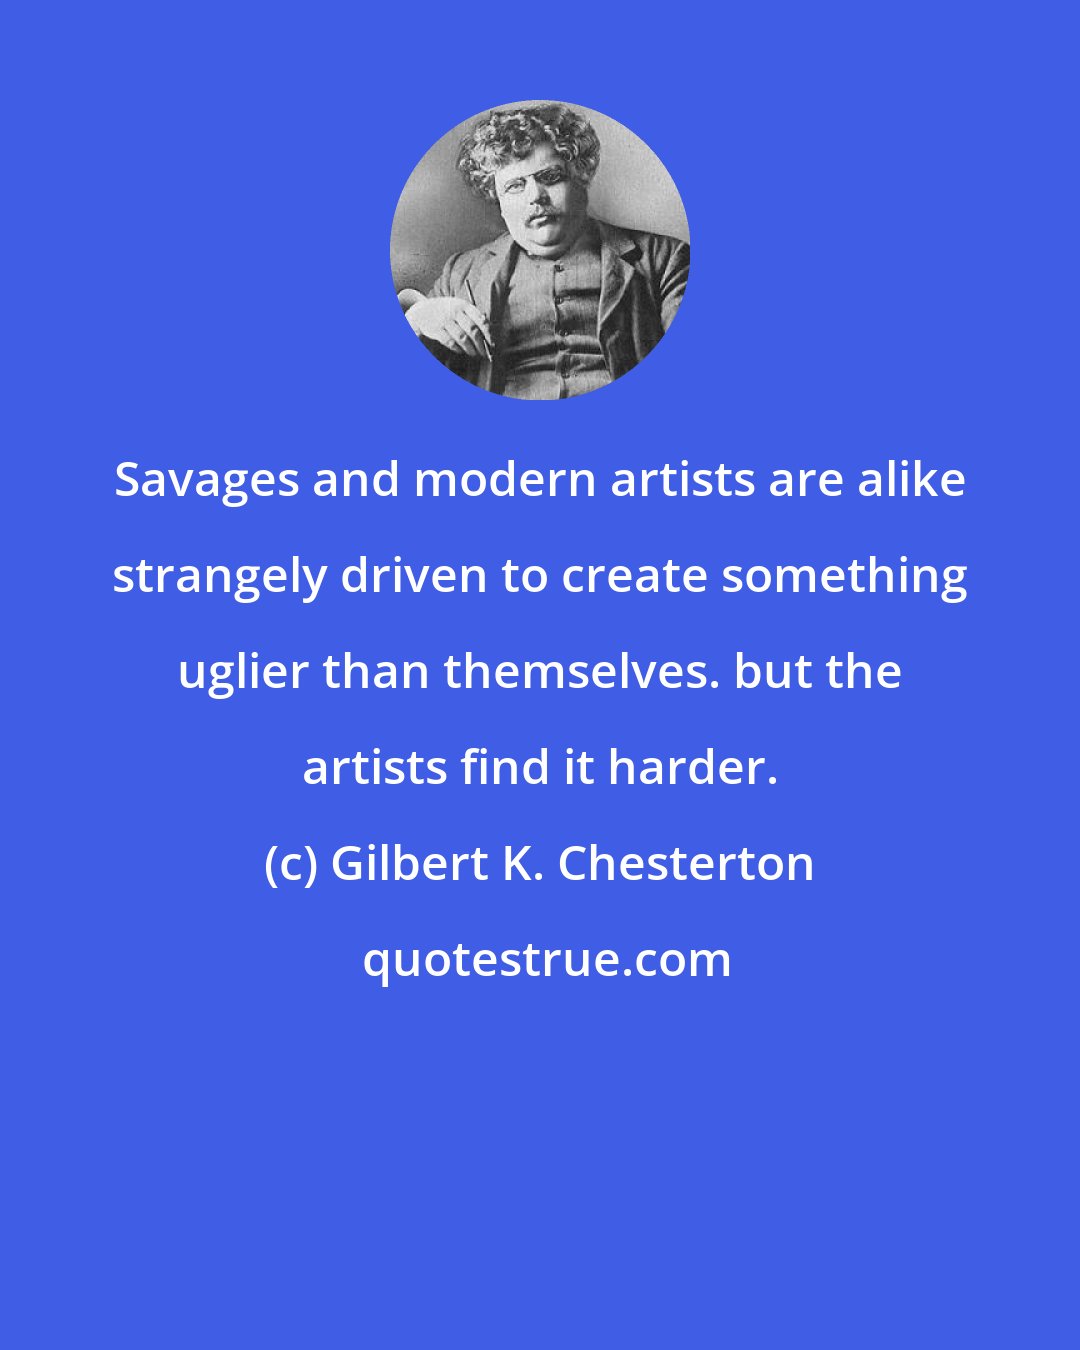 Gilbert K. Chesterton: Savages and modern artists are alike strangely driven to create something uglier than themselves. but the artists find it harder.